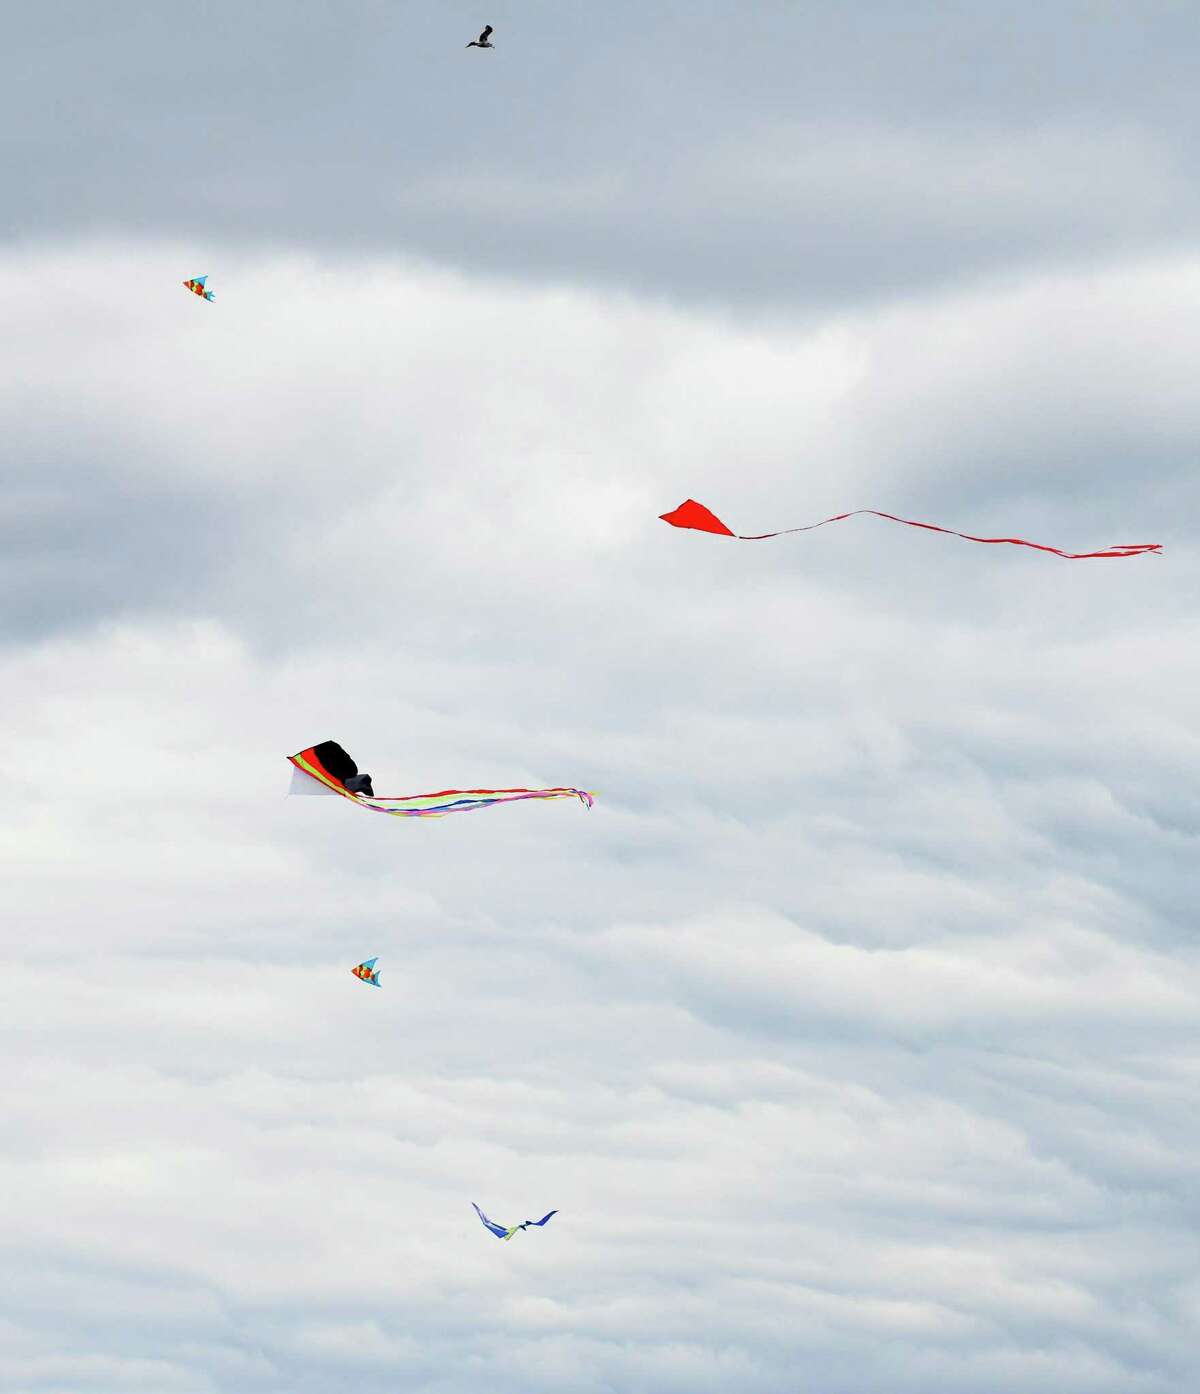 Kites fly during the annual Kite Flying Festival at Greenwich Point Park in Old Greenwich, Conn. Sunday, April 10, 2022. Greenwich Recreation and Greenwich Arts Council partnered to host the festival, which atrracted hundreds of kite flyers on a perfectly windy day at the beach.